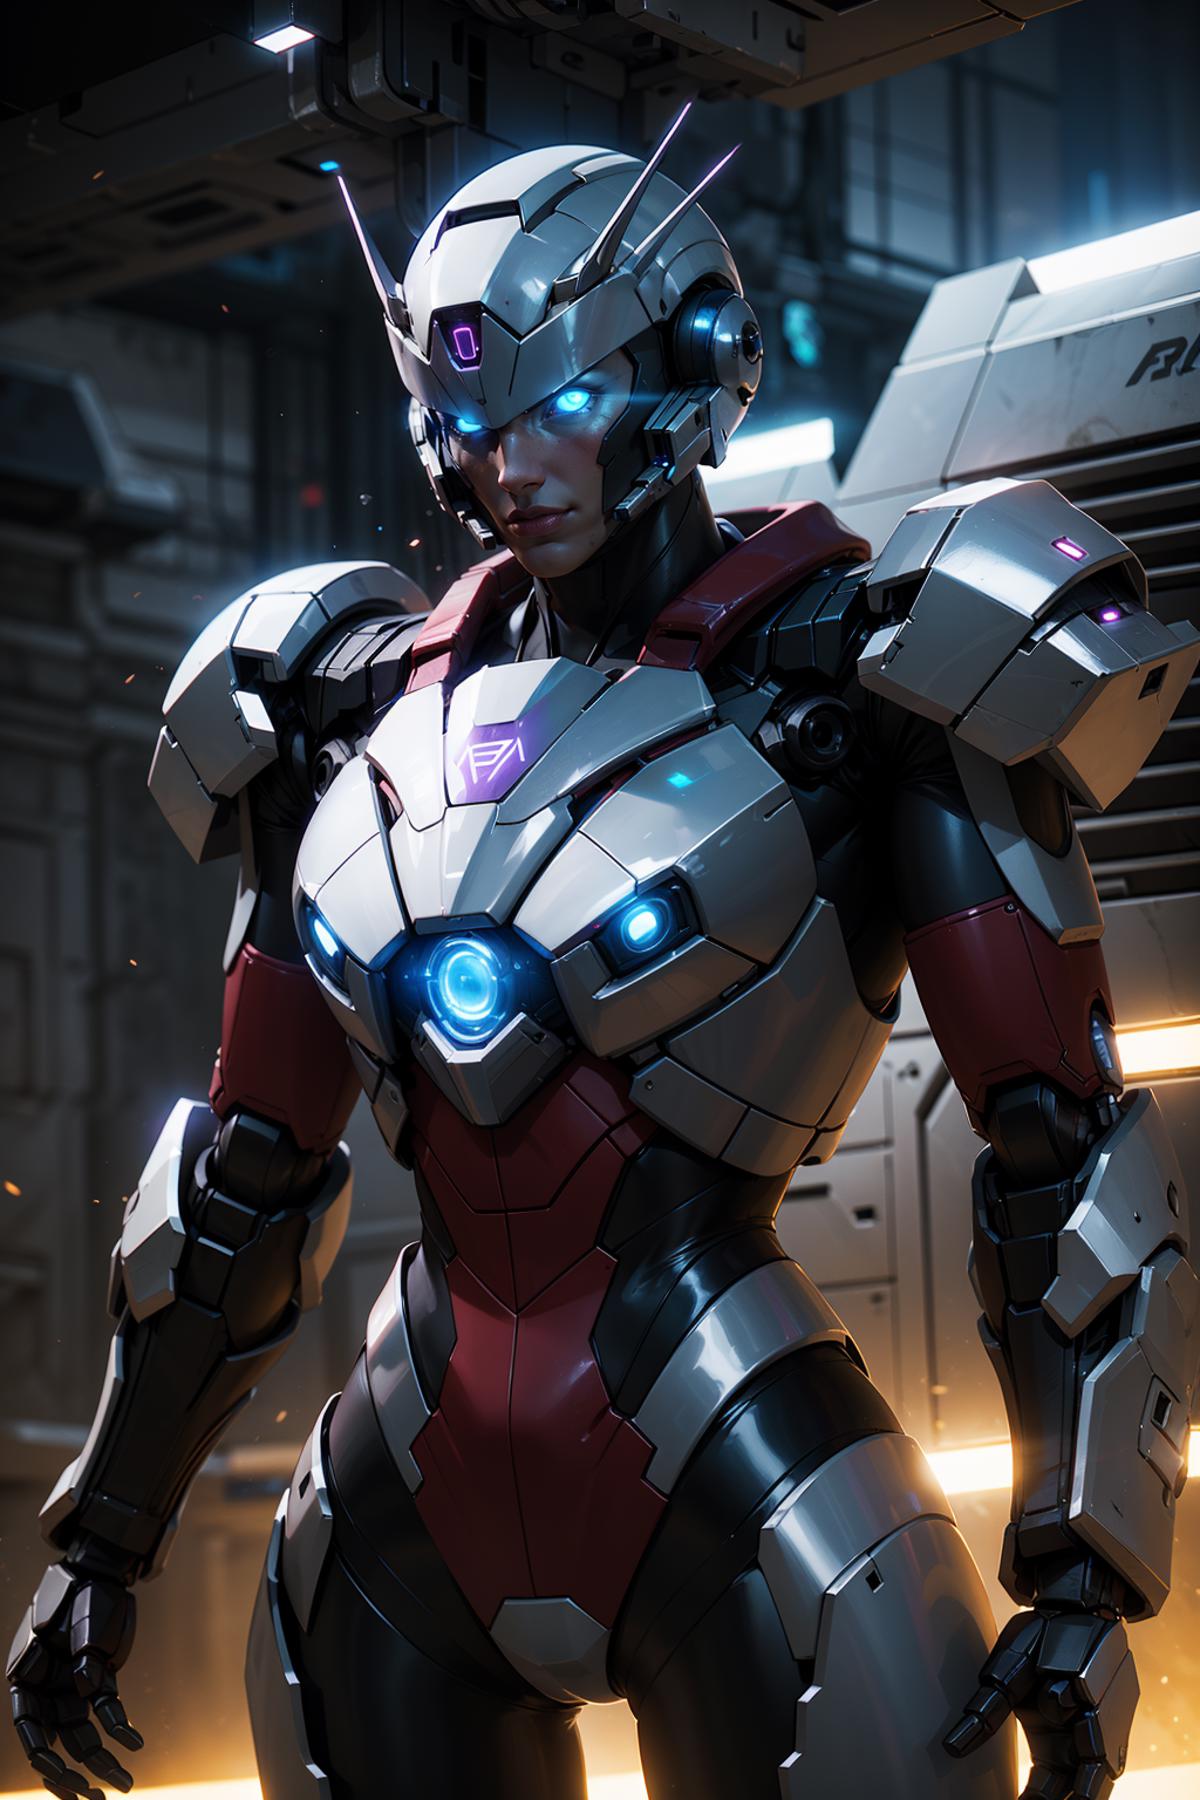 A futuristic robot with a red and silver suit, standing in front of a wall.